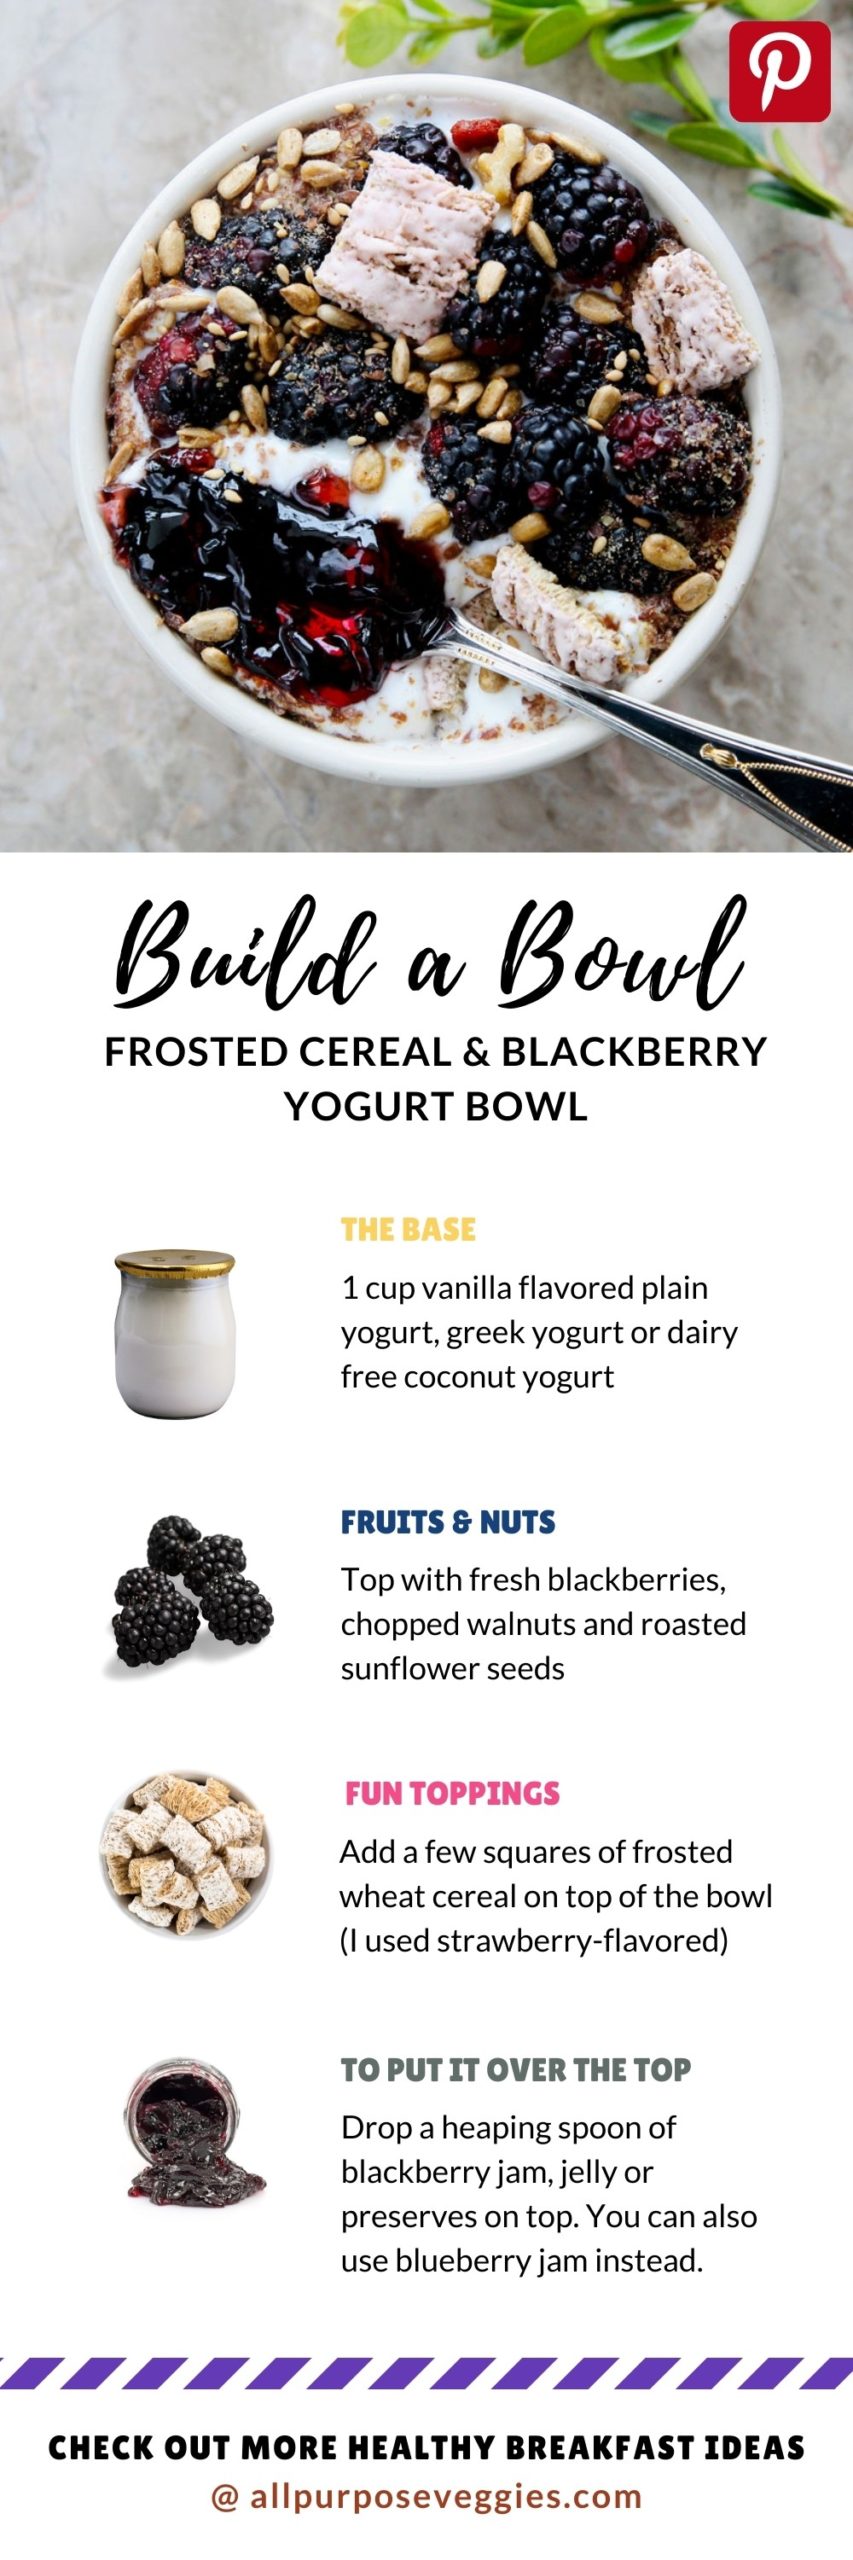 how to make Frosted Cereal & Blackberry Yogurt Bowl pinterest pin